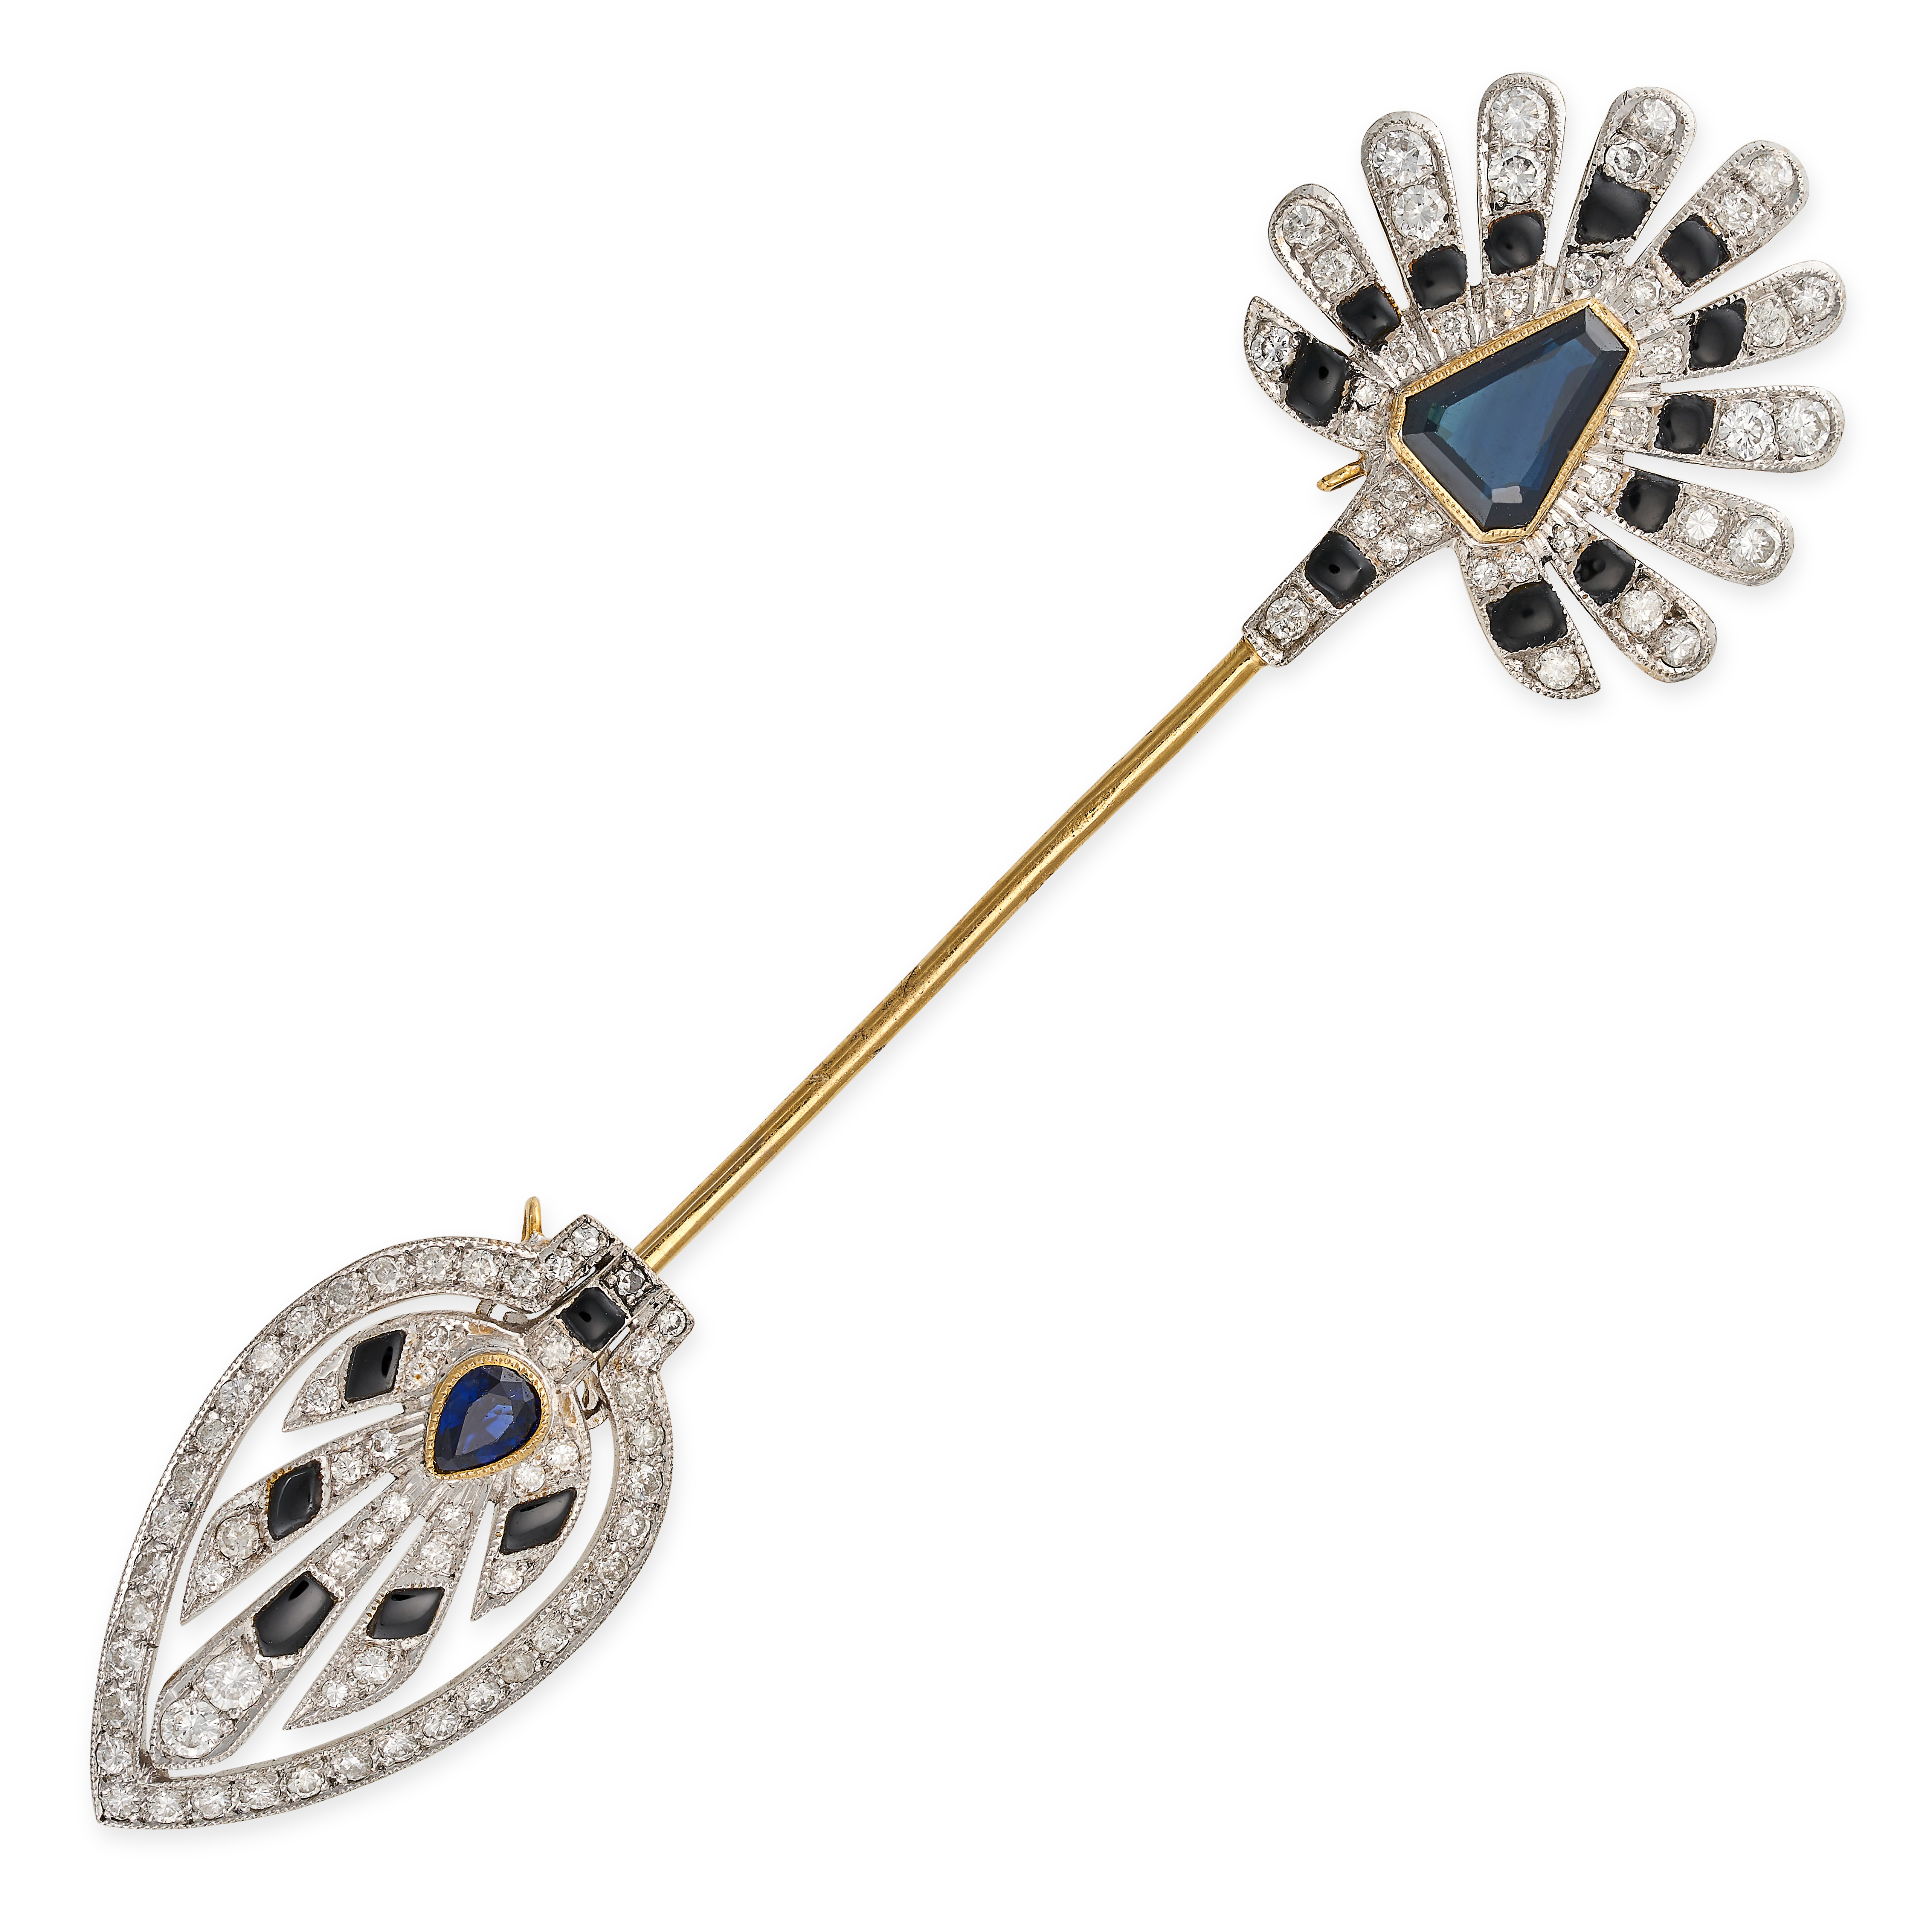 A SAPPHIRE, ONYX AND DIAMOND JABOT PIN BROOCH in 18ct yellow gold, designed as an arrow set with ...